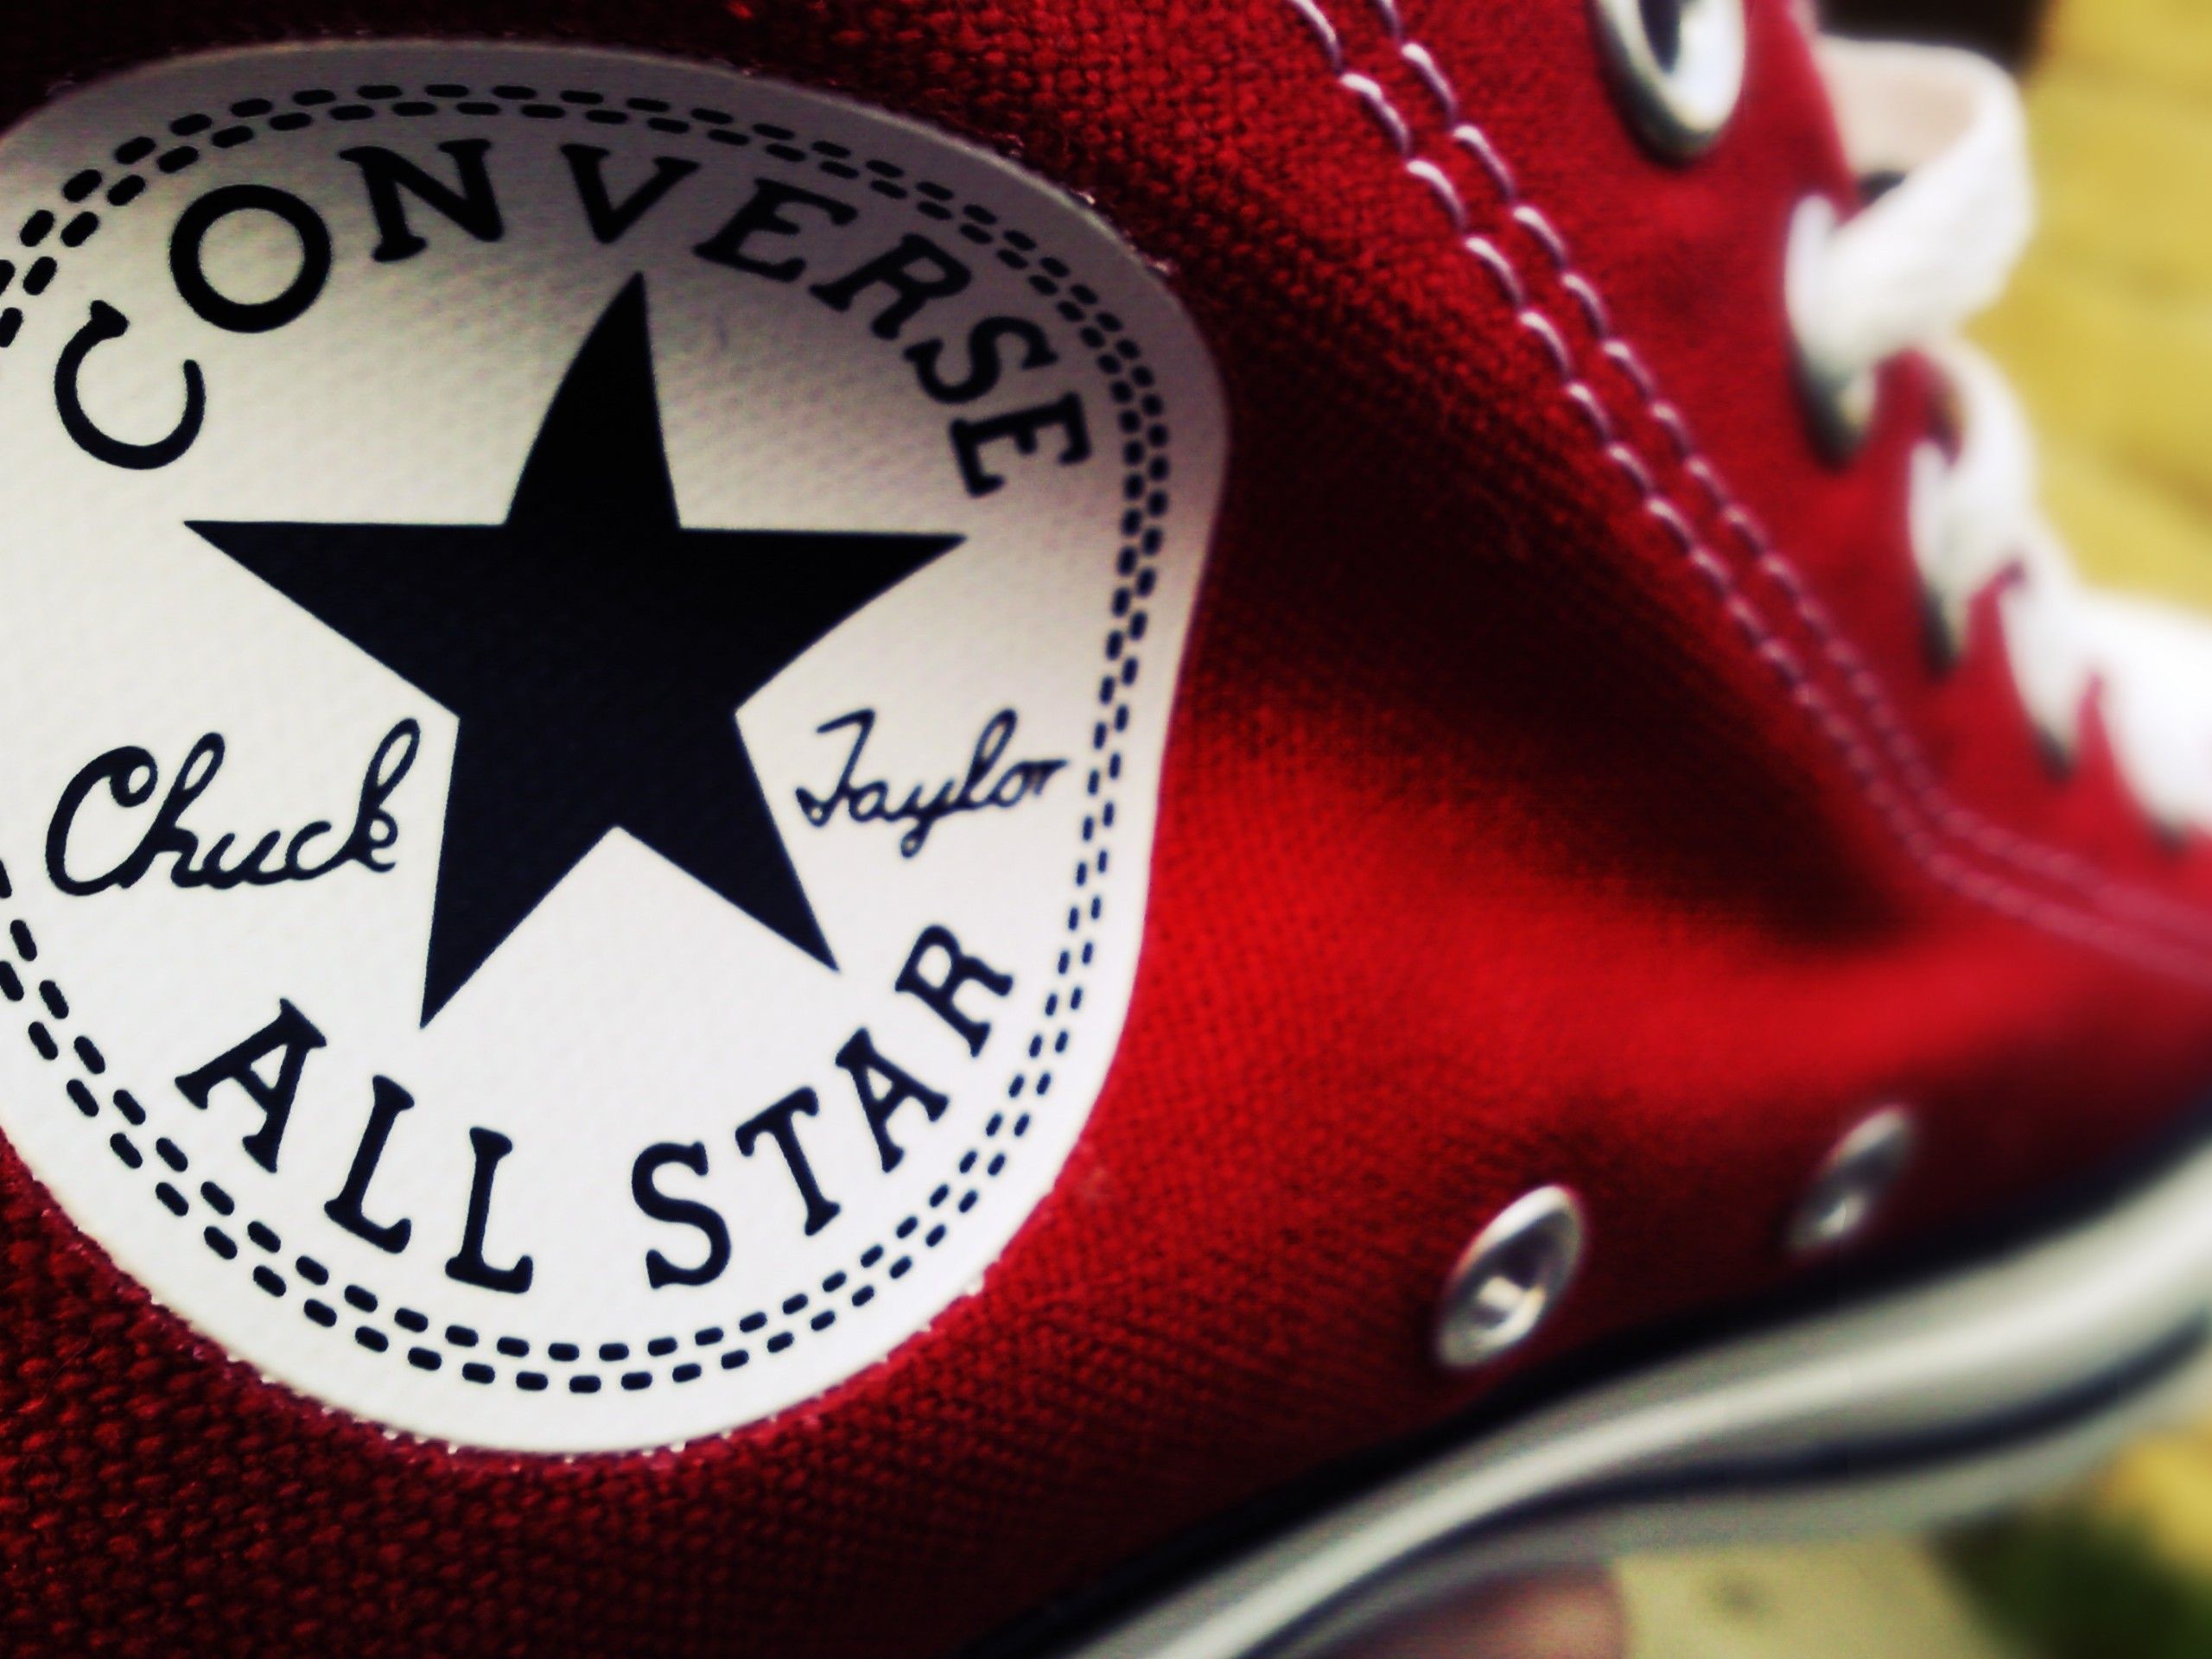 Converse Shoes Wallpapers